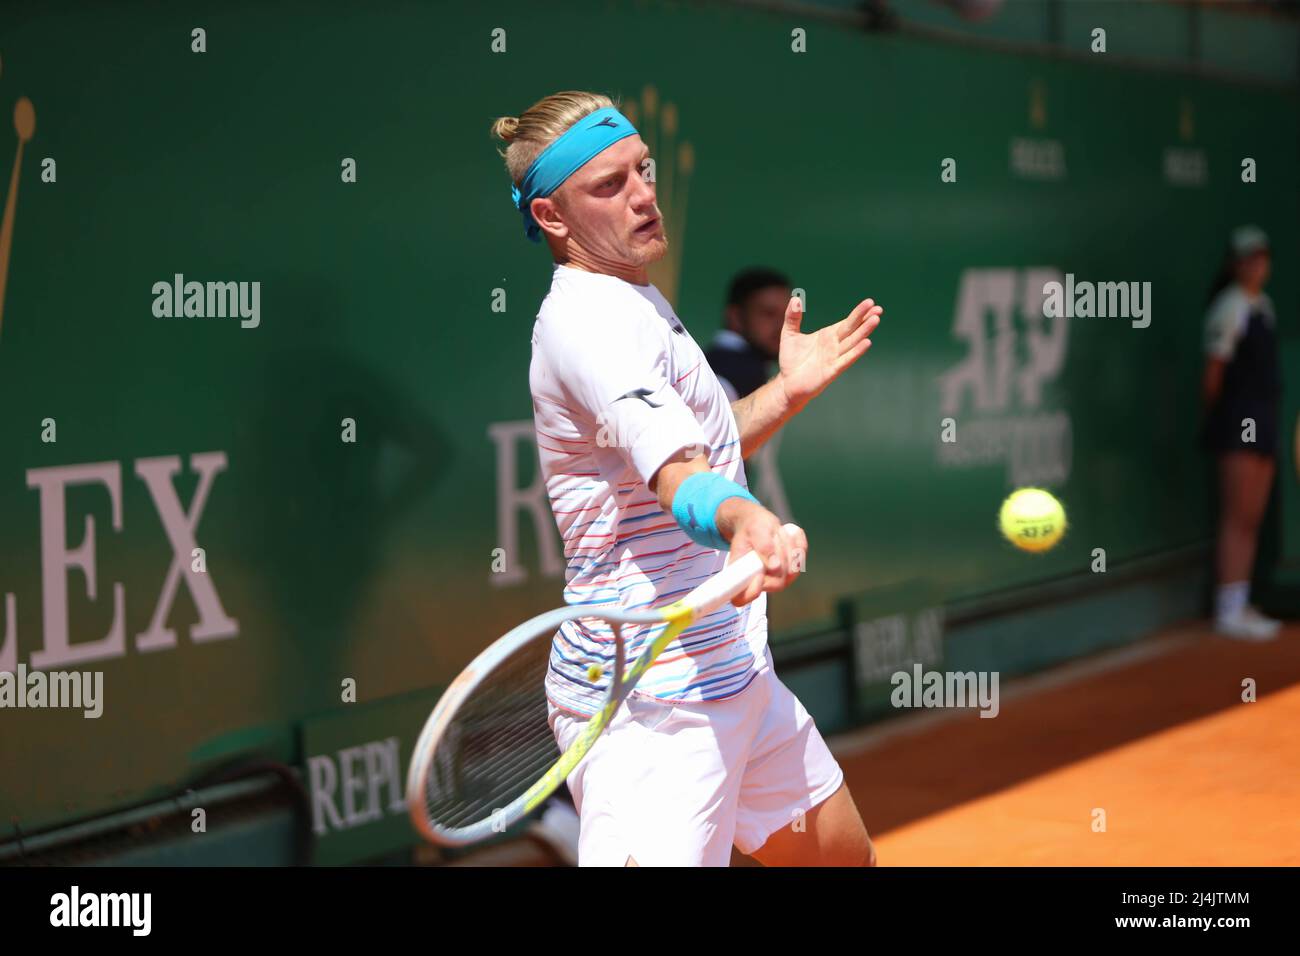 Alejandro Davidovich Fokina of Spain during the Rolex Monte-Carlo Masters  2022, ATP Masters 1000 tennis